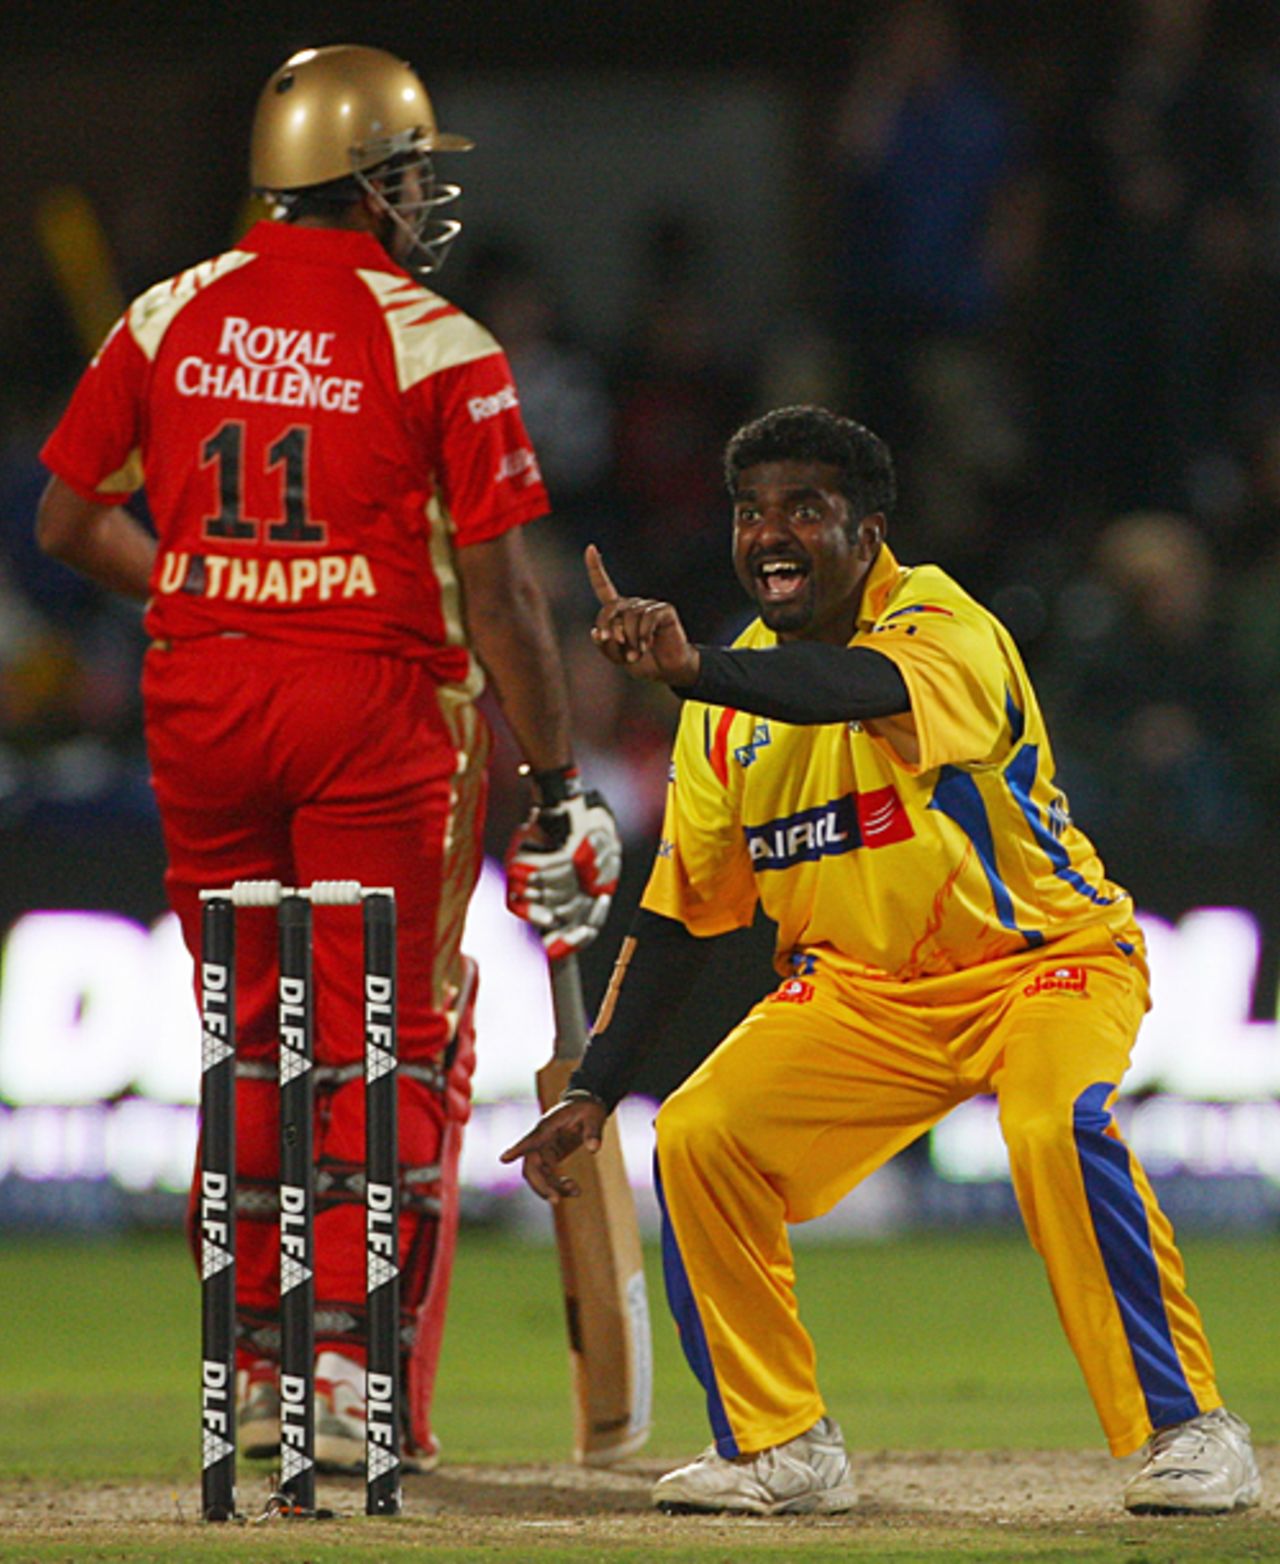 Muttiah Muralitharan successfully appeals for an lbw against Kevin Pietersen, Bangalore Royal Challengers v Chennai Super Kings, IPL, 5th game, Port Elizabeth, April 20, 2009